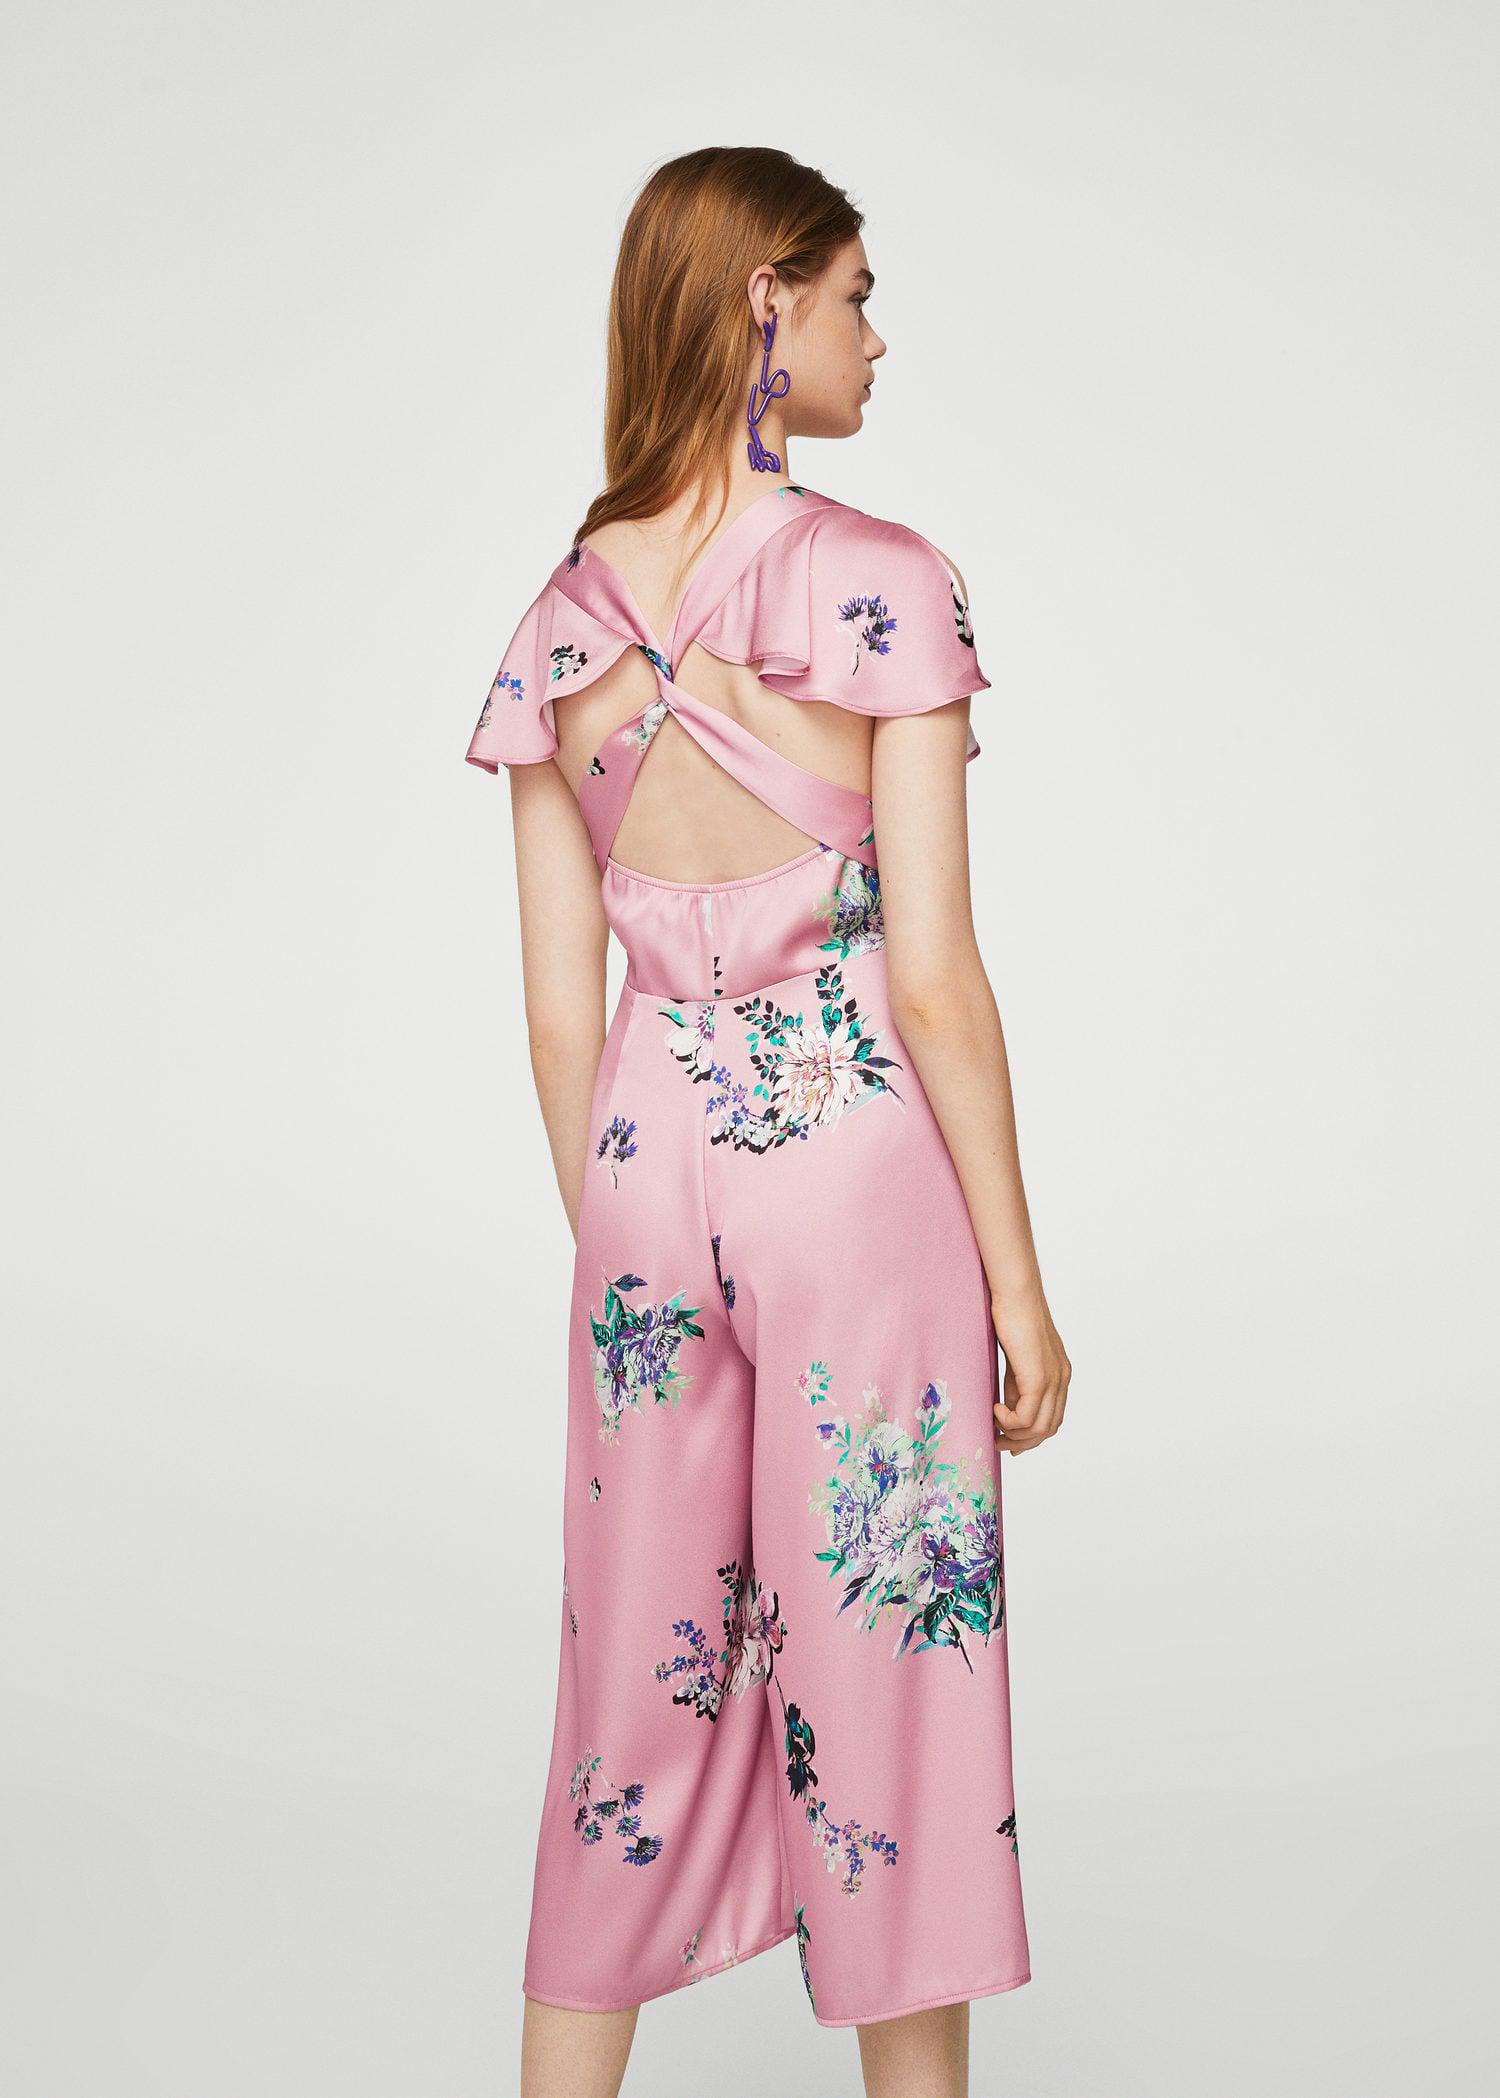 Lyst - Mango Ruffle Floral Jumpsuit in Pink